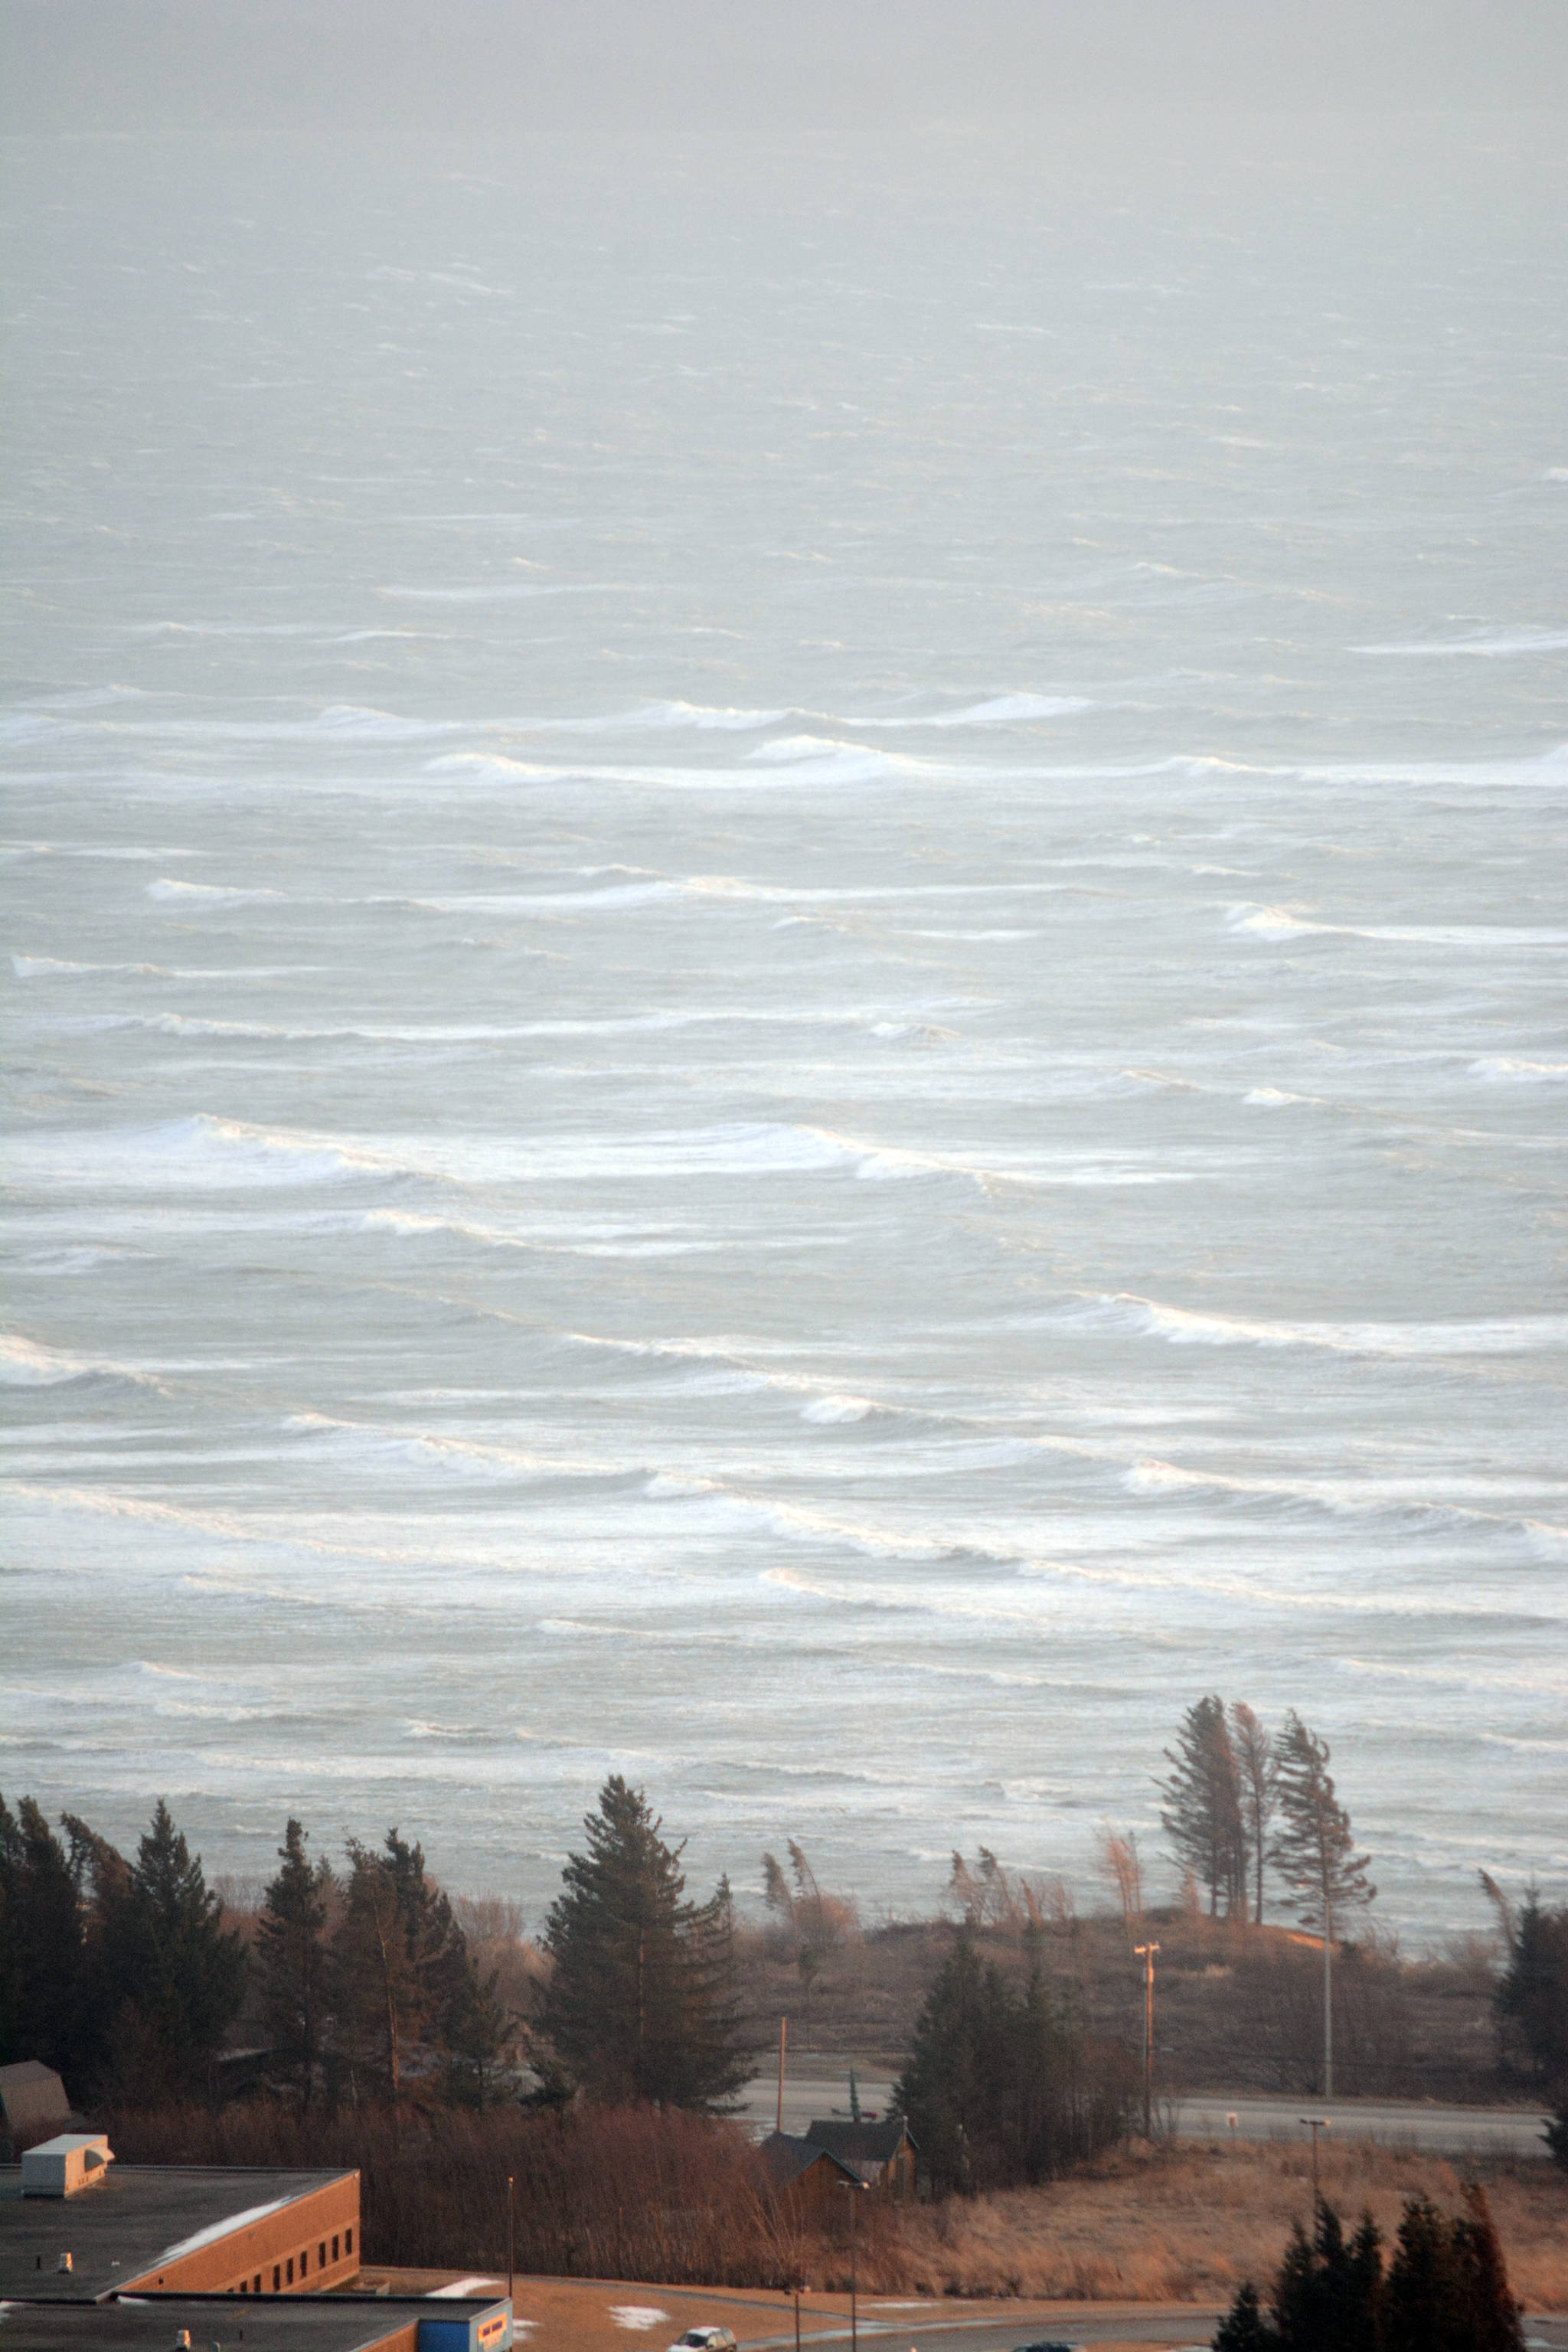 High waves blow on Kachemak Bay about 6 p.m. Monday, Feb. 26, 2018 as seen from West Hill Road in Homer, Alaska. The storm caused power outages on the lower Kenai Peninsula and high winds caused drifts on area roads, including Ohlson Mountain Road. (Photo by Michael Armstrong/Homer News)